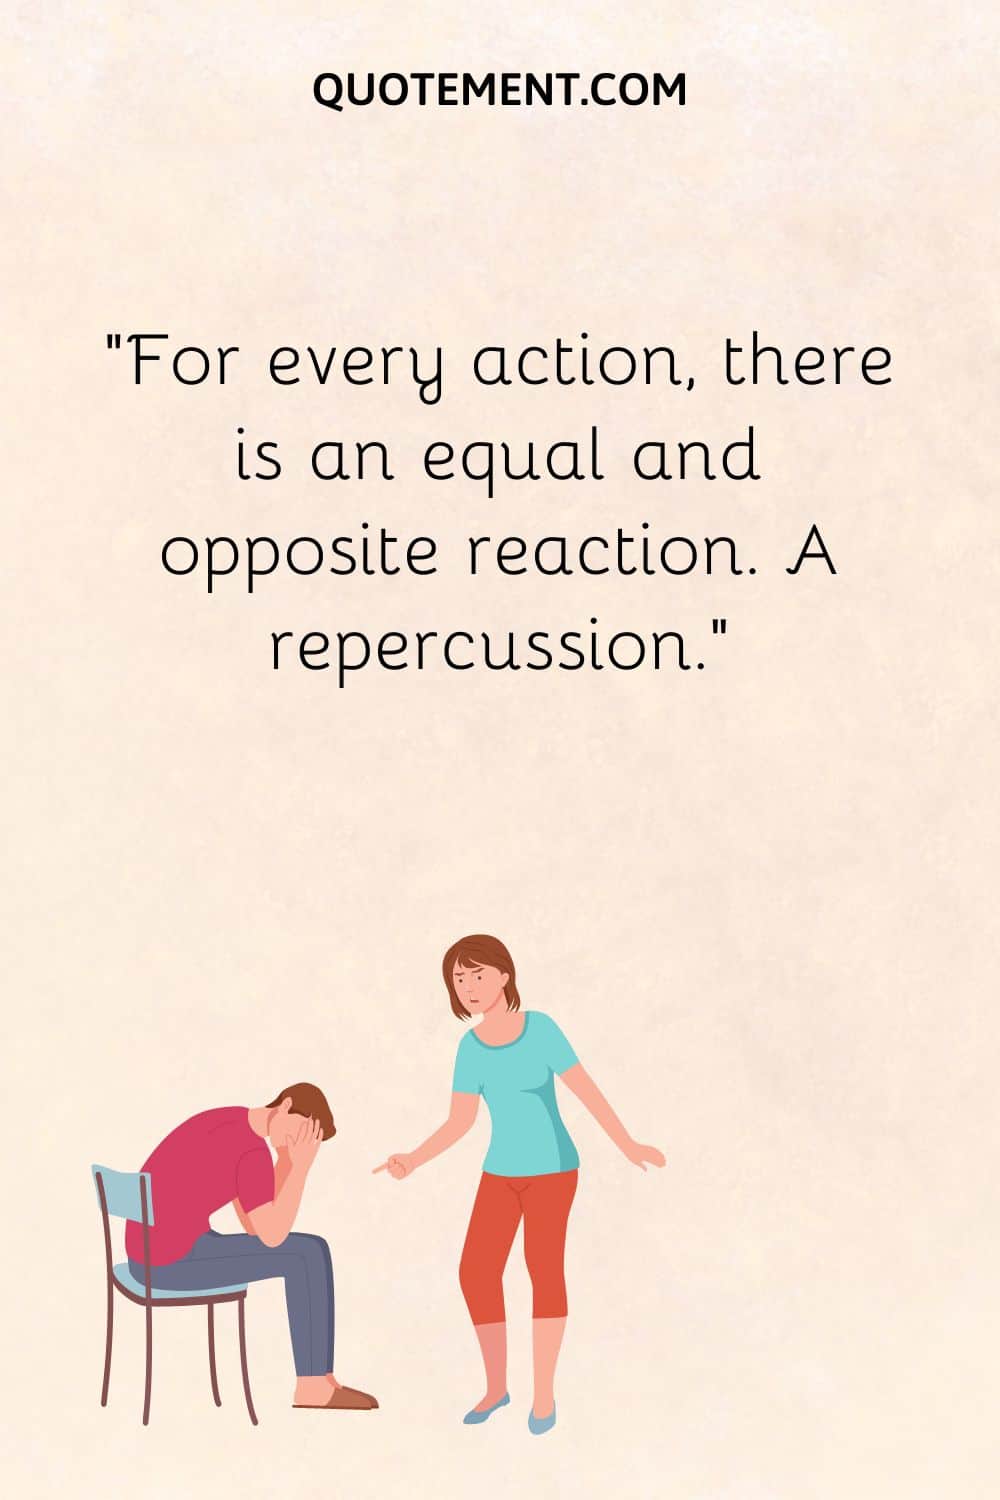 For every action, there is an equal and opposite reaction